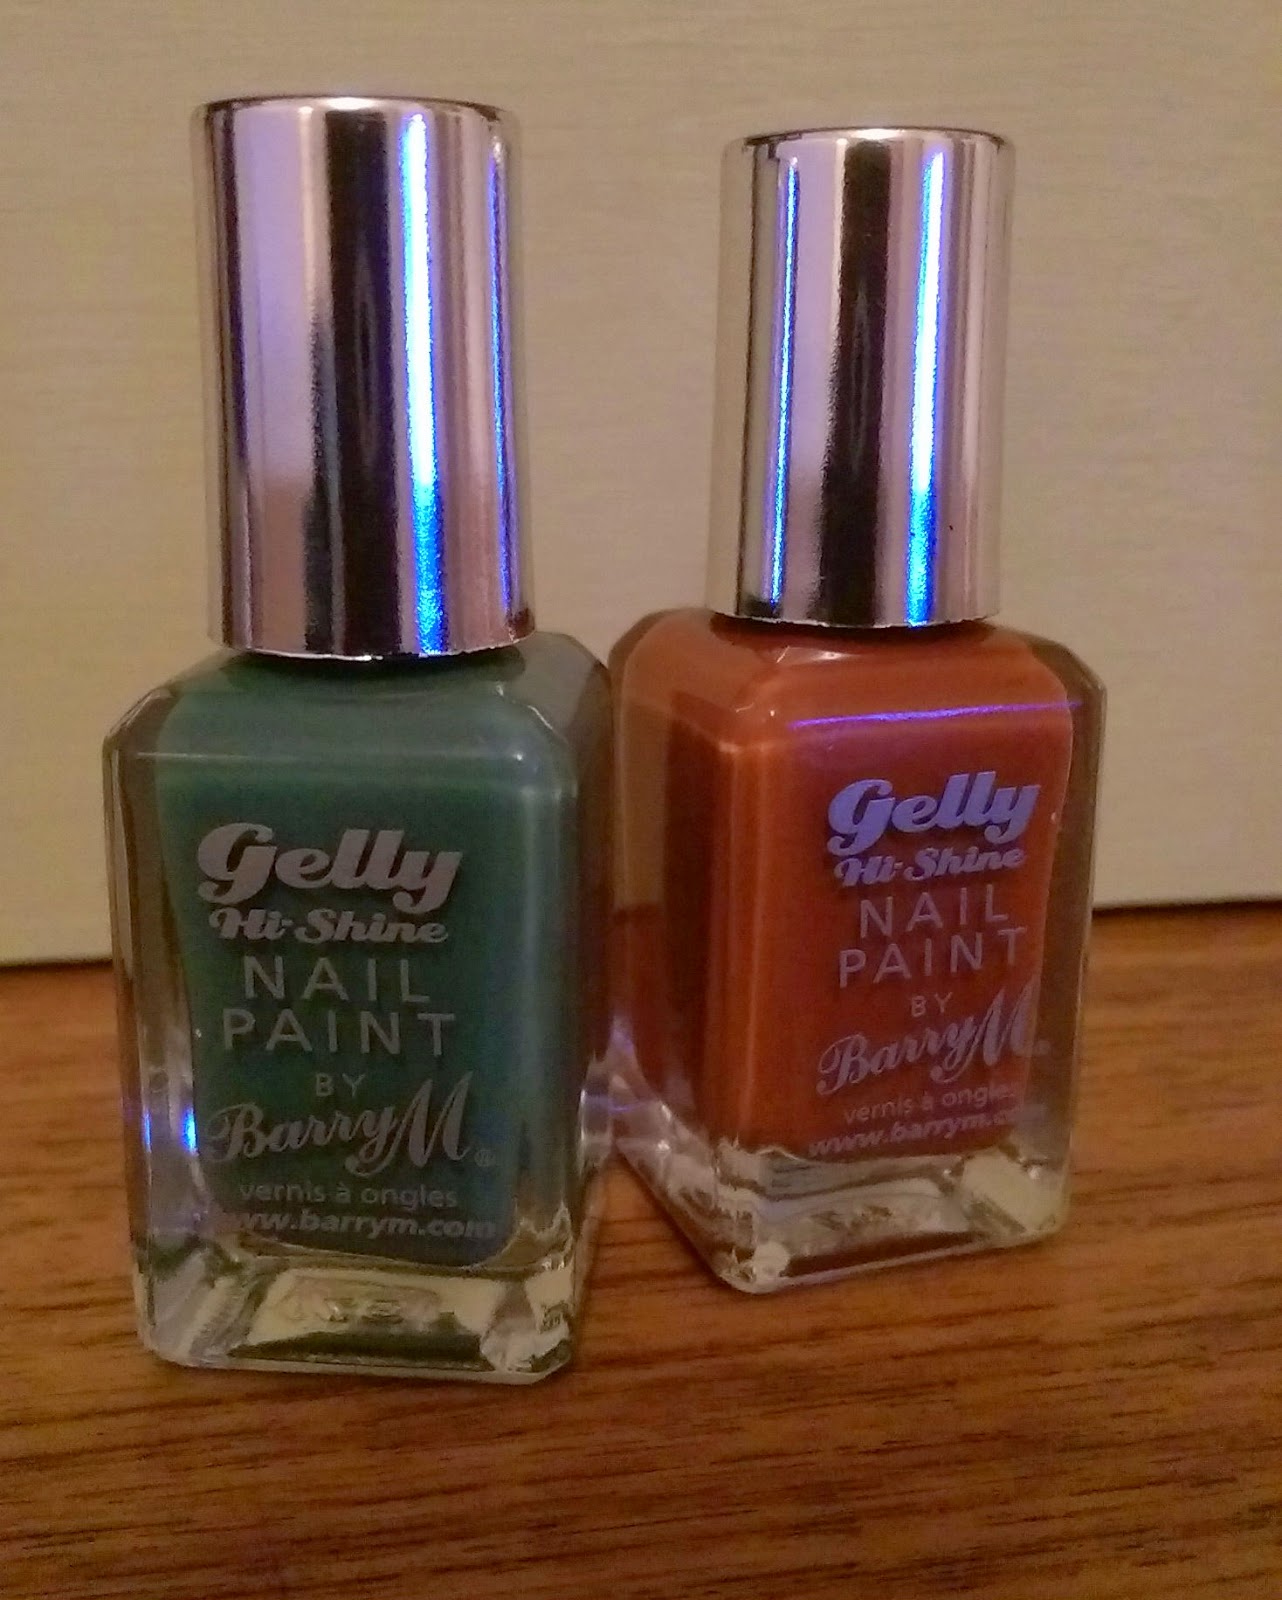 Autumnal Tones from Barry M A/W Collection